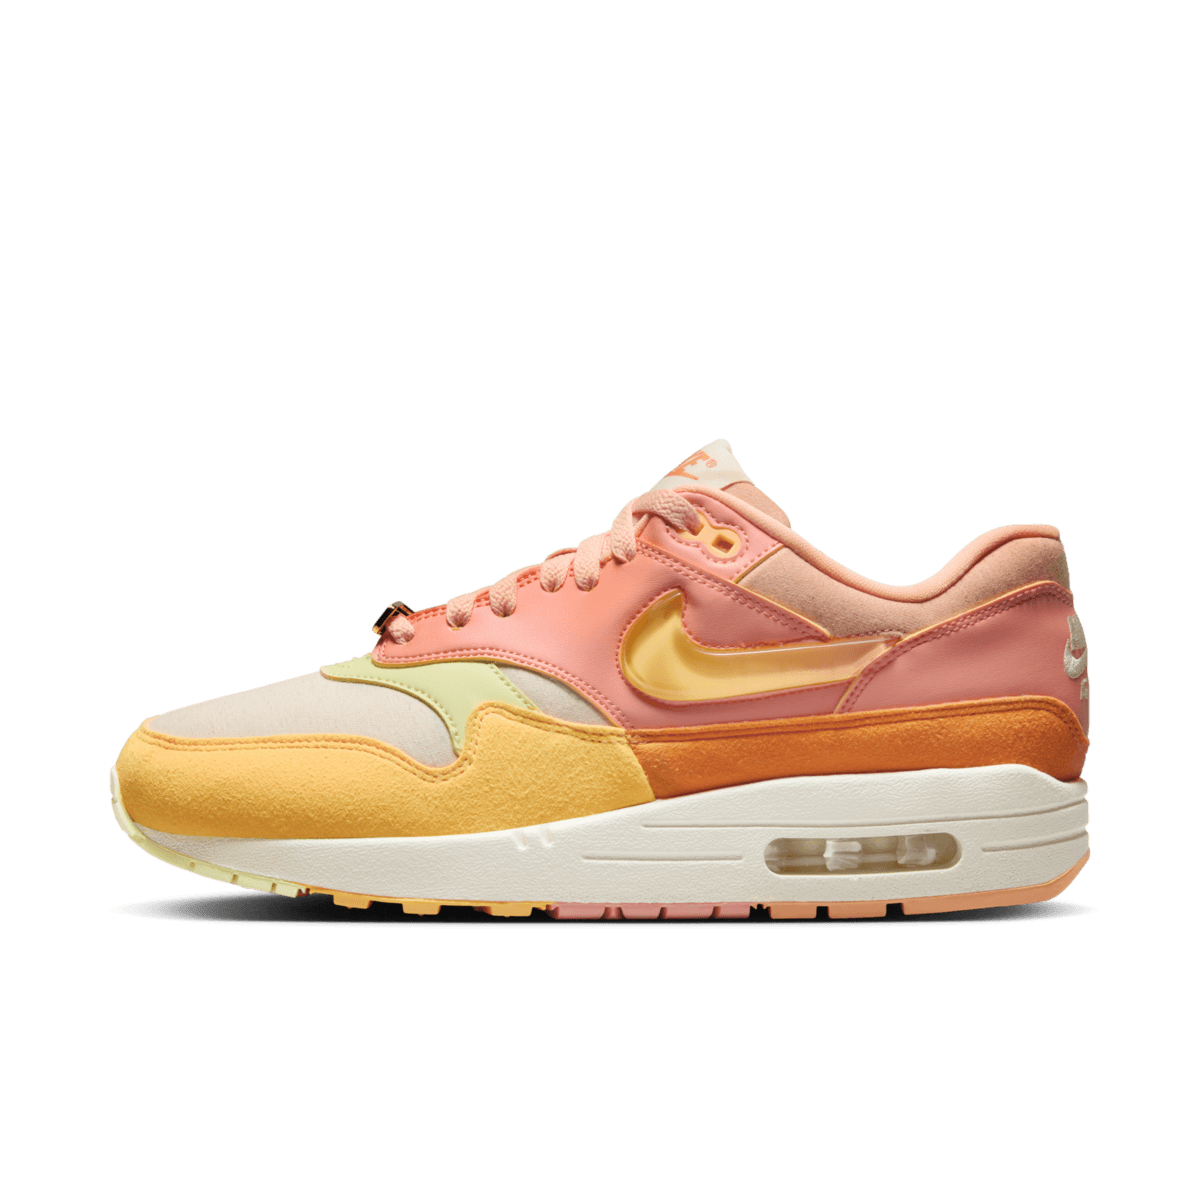 Nike Air Max 1 'Orange Frost' - Puerto Rico Pack